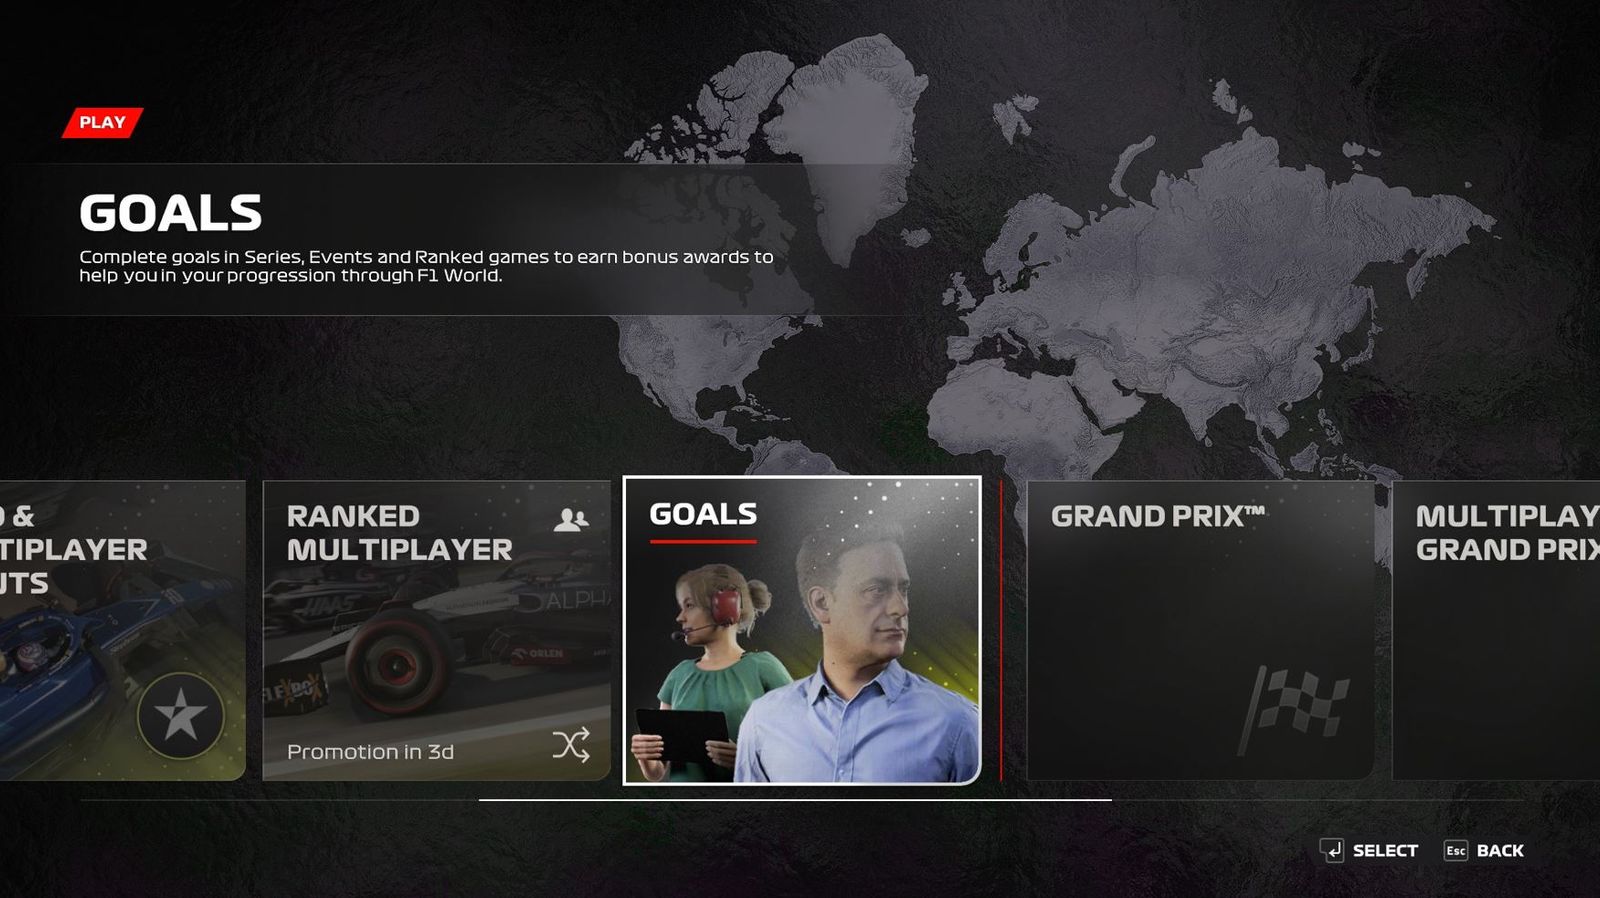 The Goals option on the F1 World menu in F1 23